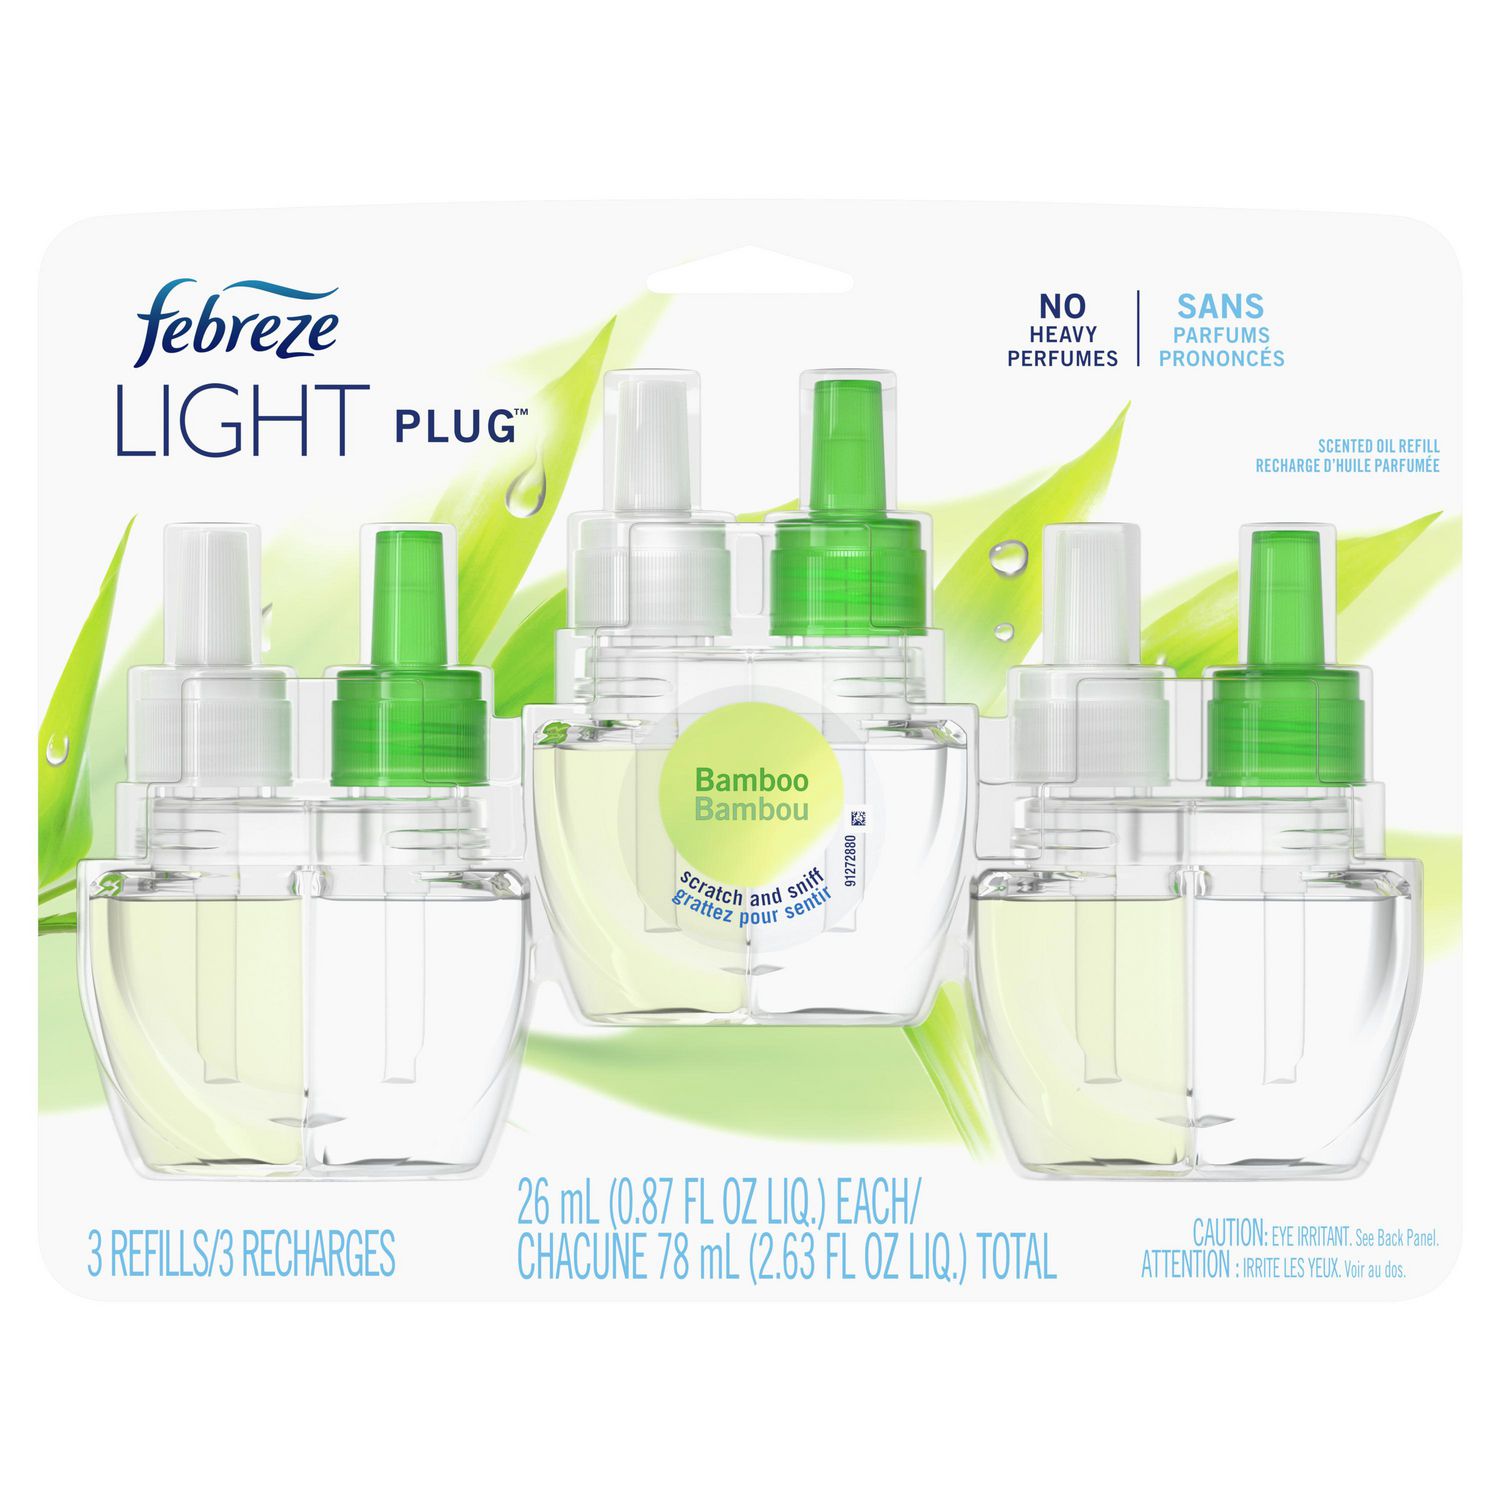 Save on Febreze Light Plug Bamboo Scented Oil Refill Order Online